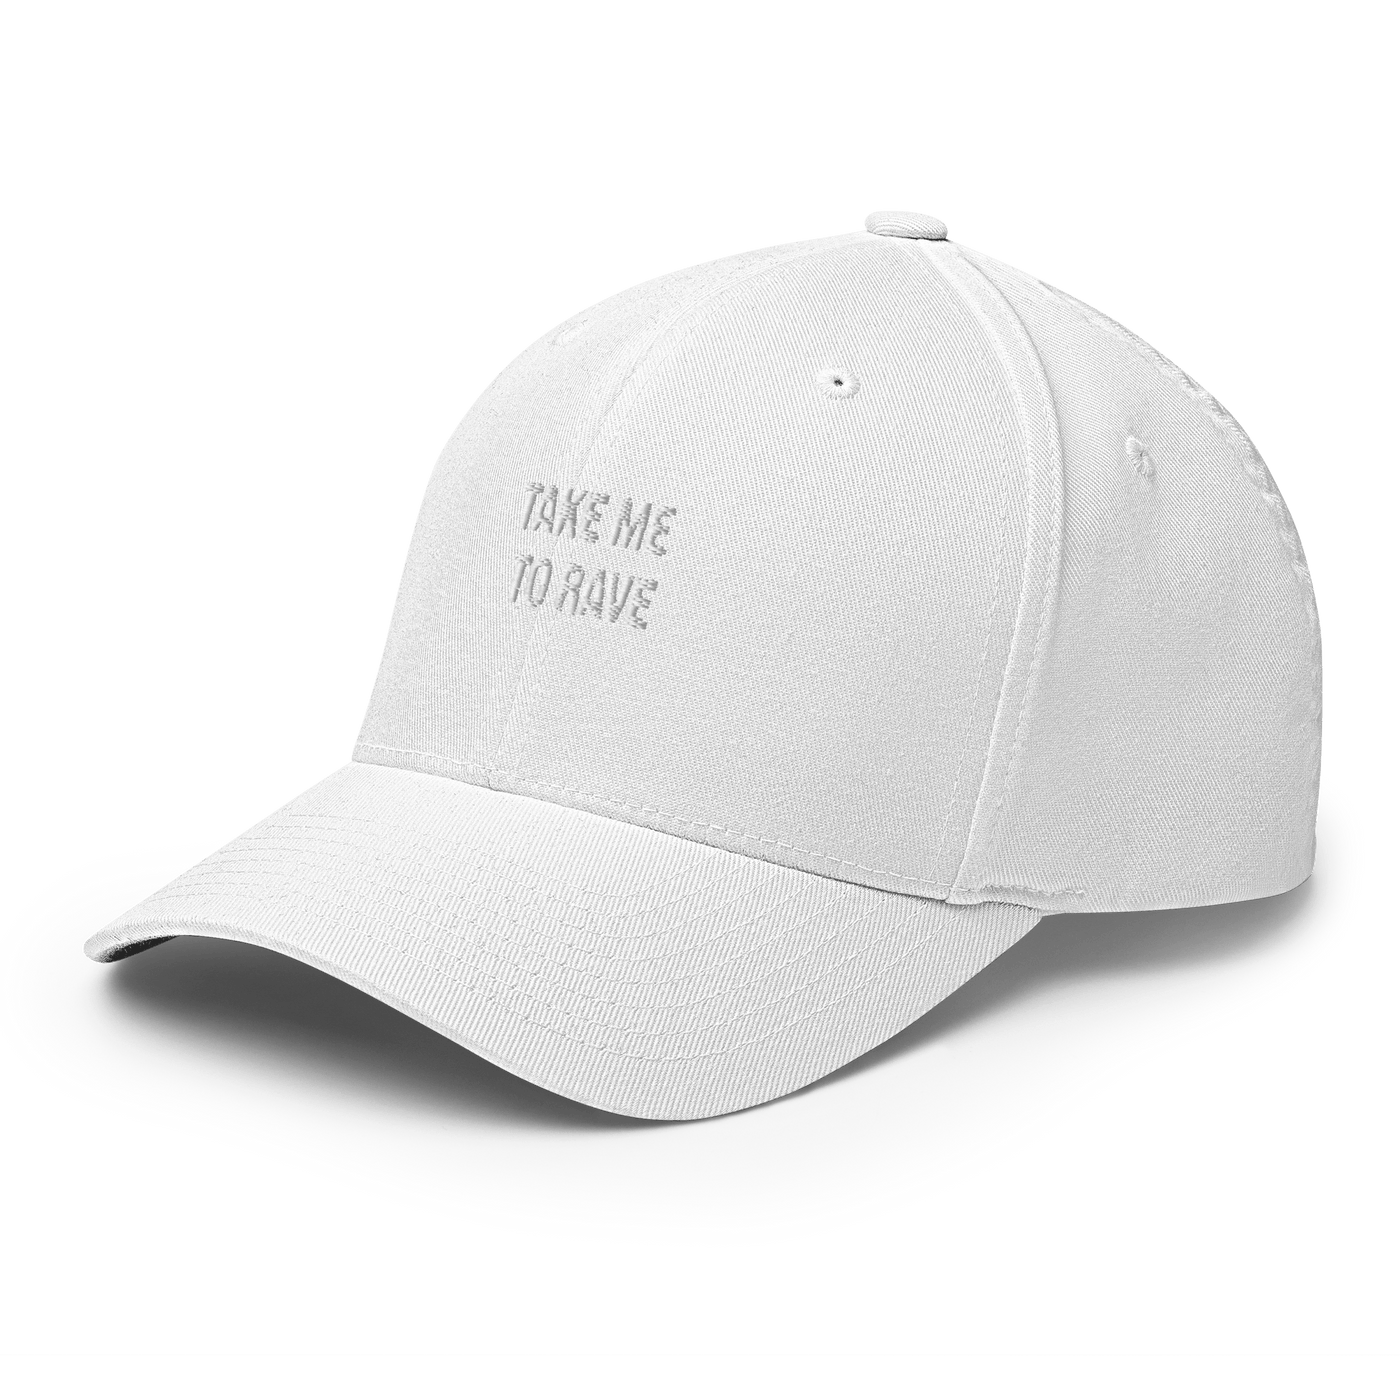 Take me to rave Flexfit Cap - White - S/M - Just Another Cap Store